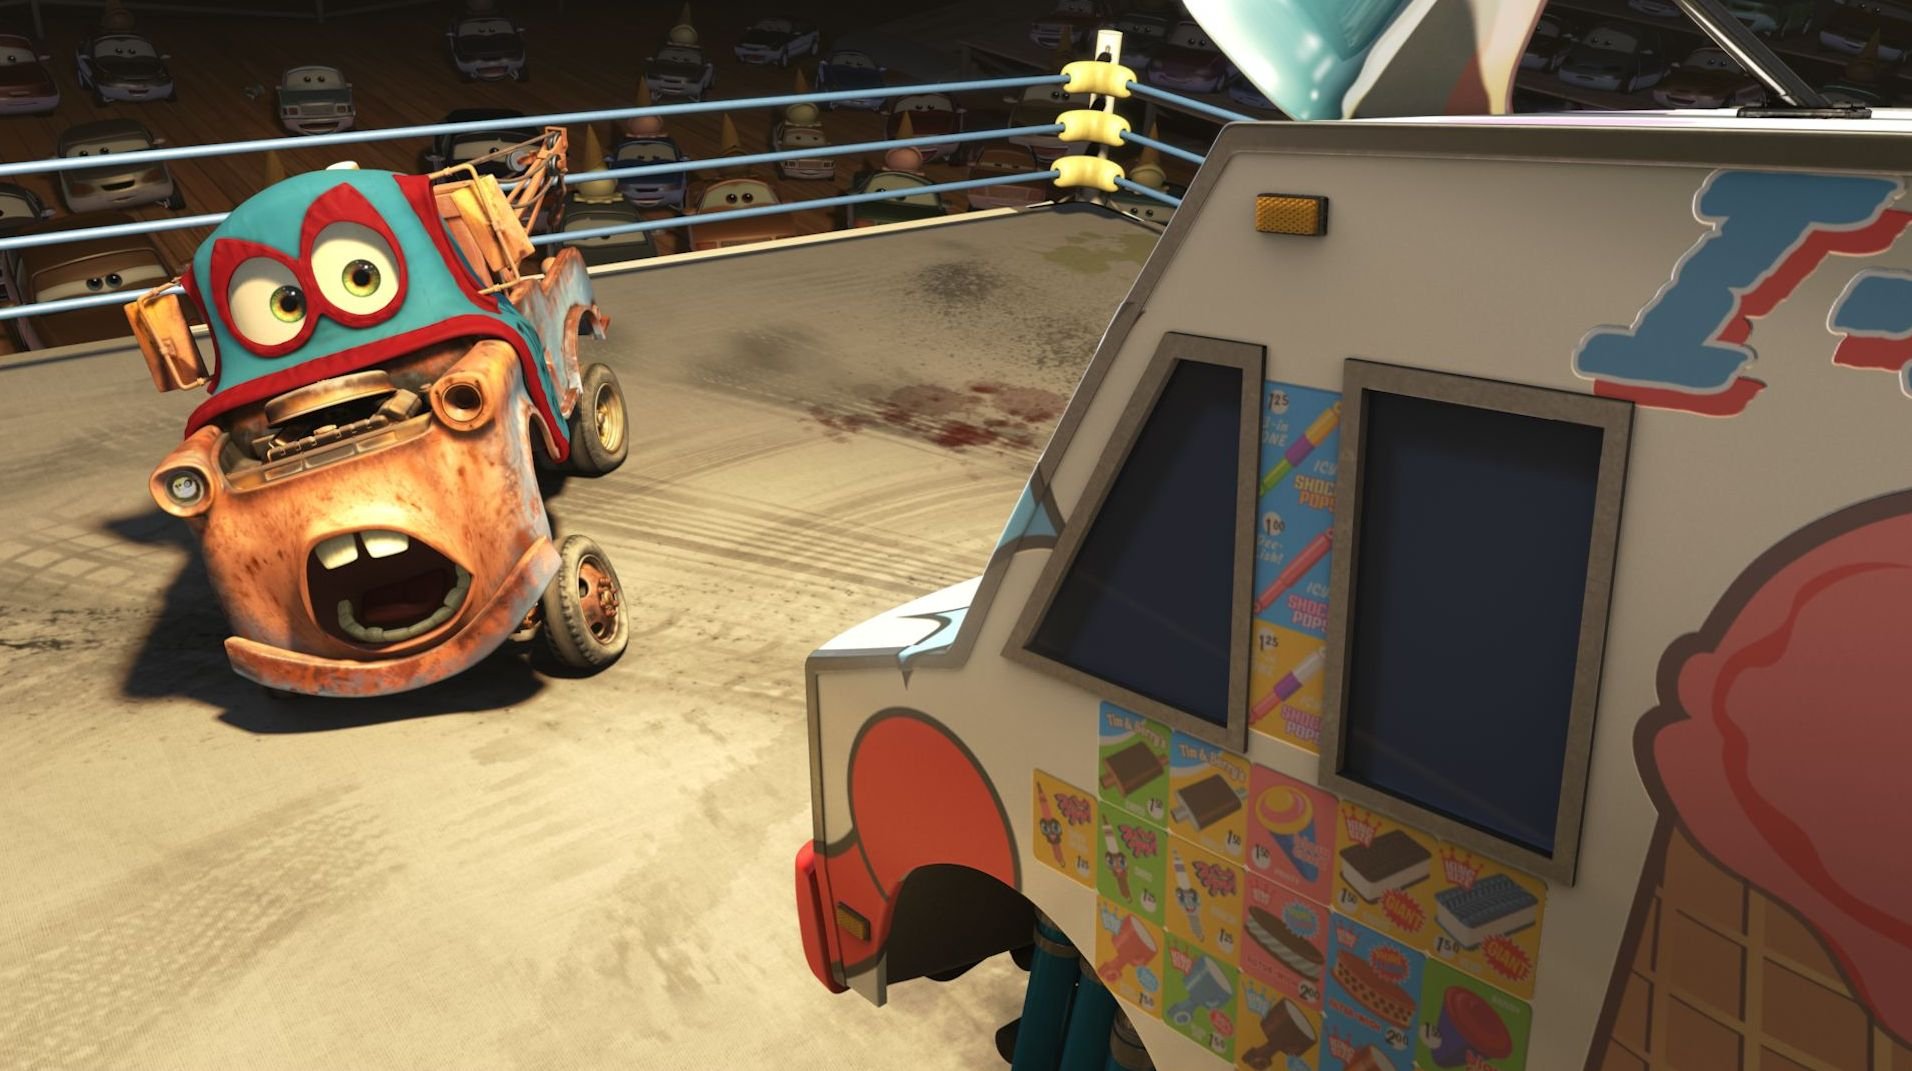 Coming to Blu-Ray Cars Toon: Mater’s Tall Tales